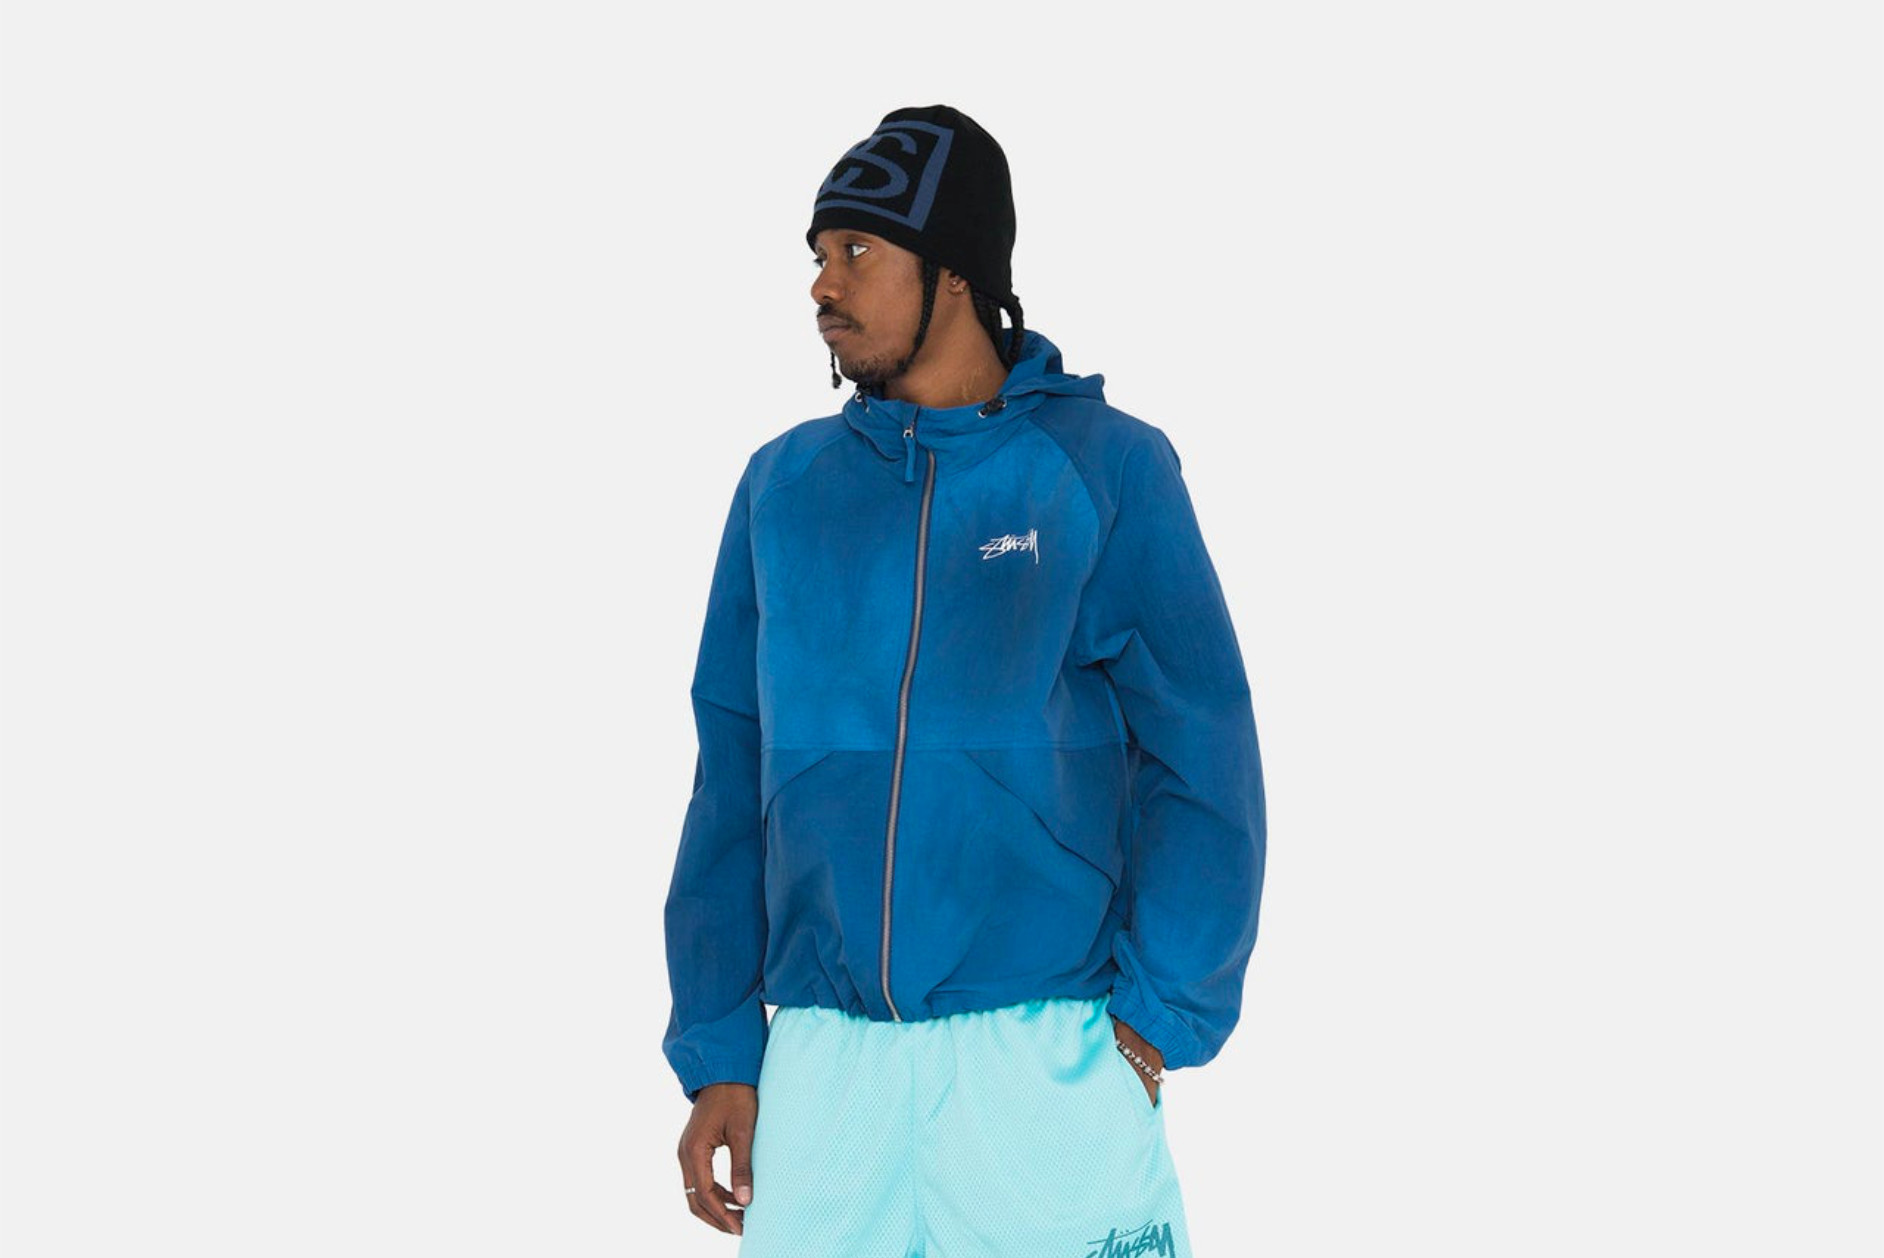 Shop the Stüssy Wave Dye Beach Shell at Resale Here